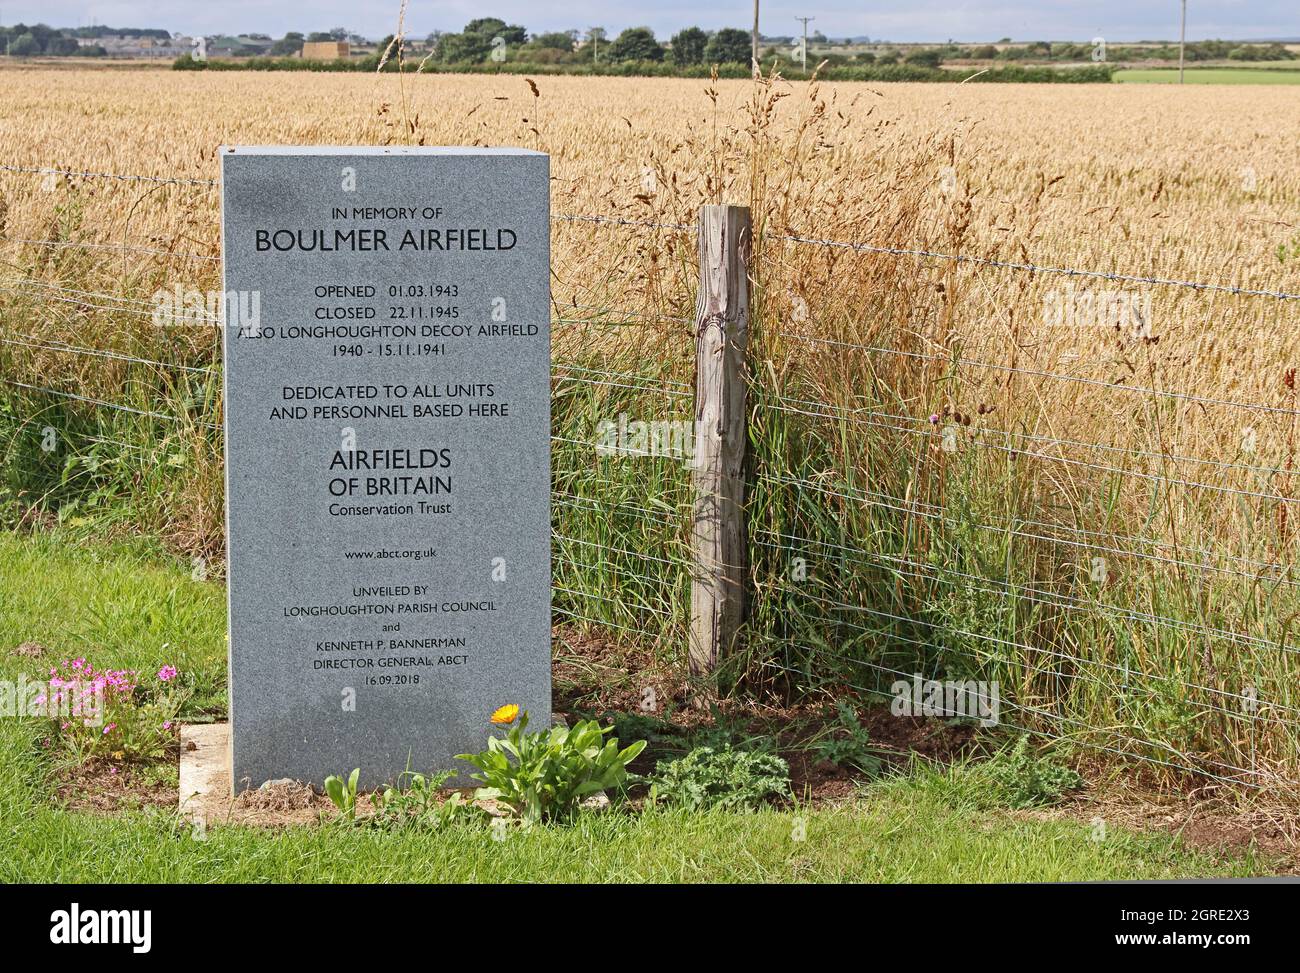 Memorial stone for WWII Boulmer Airfield and Longhoughton Decoy Airfield, Boulmer Stock Photo